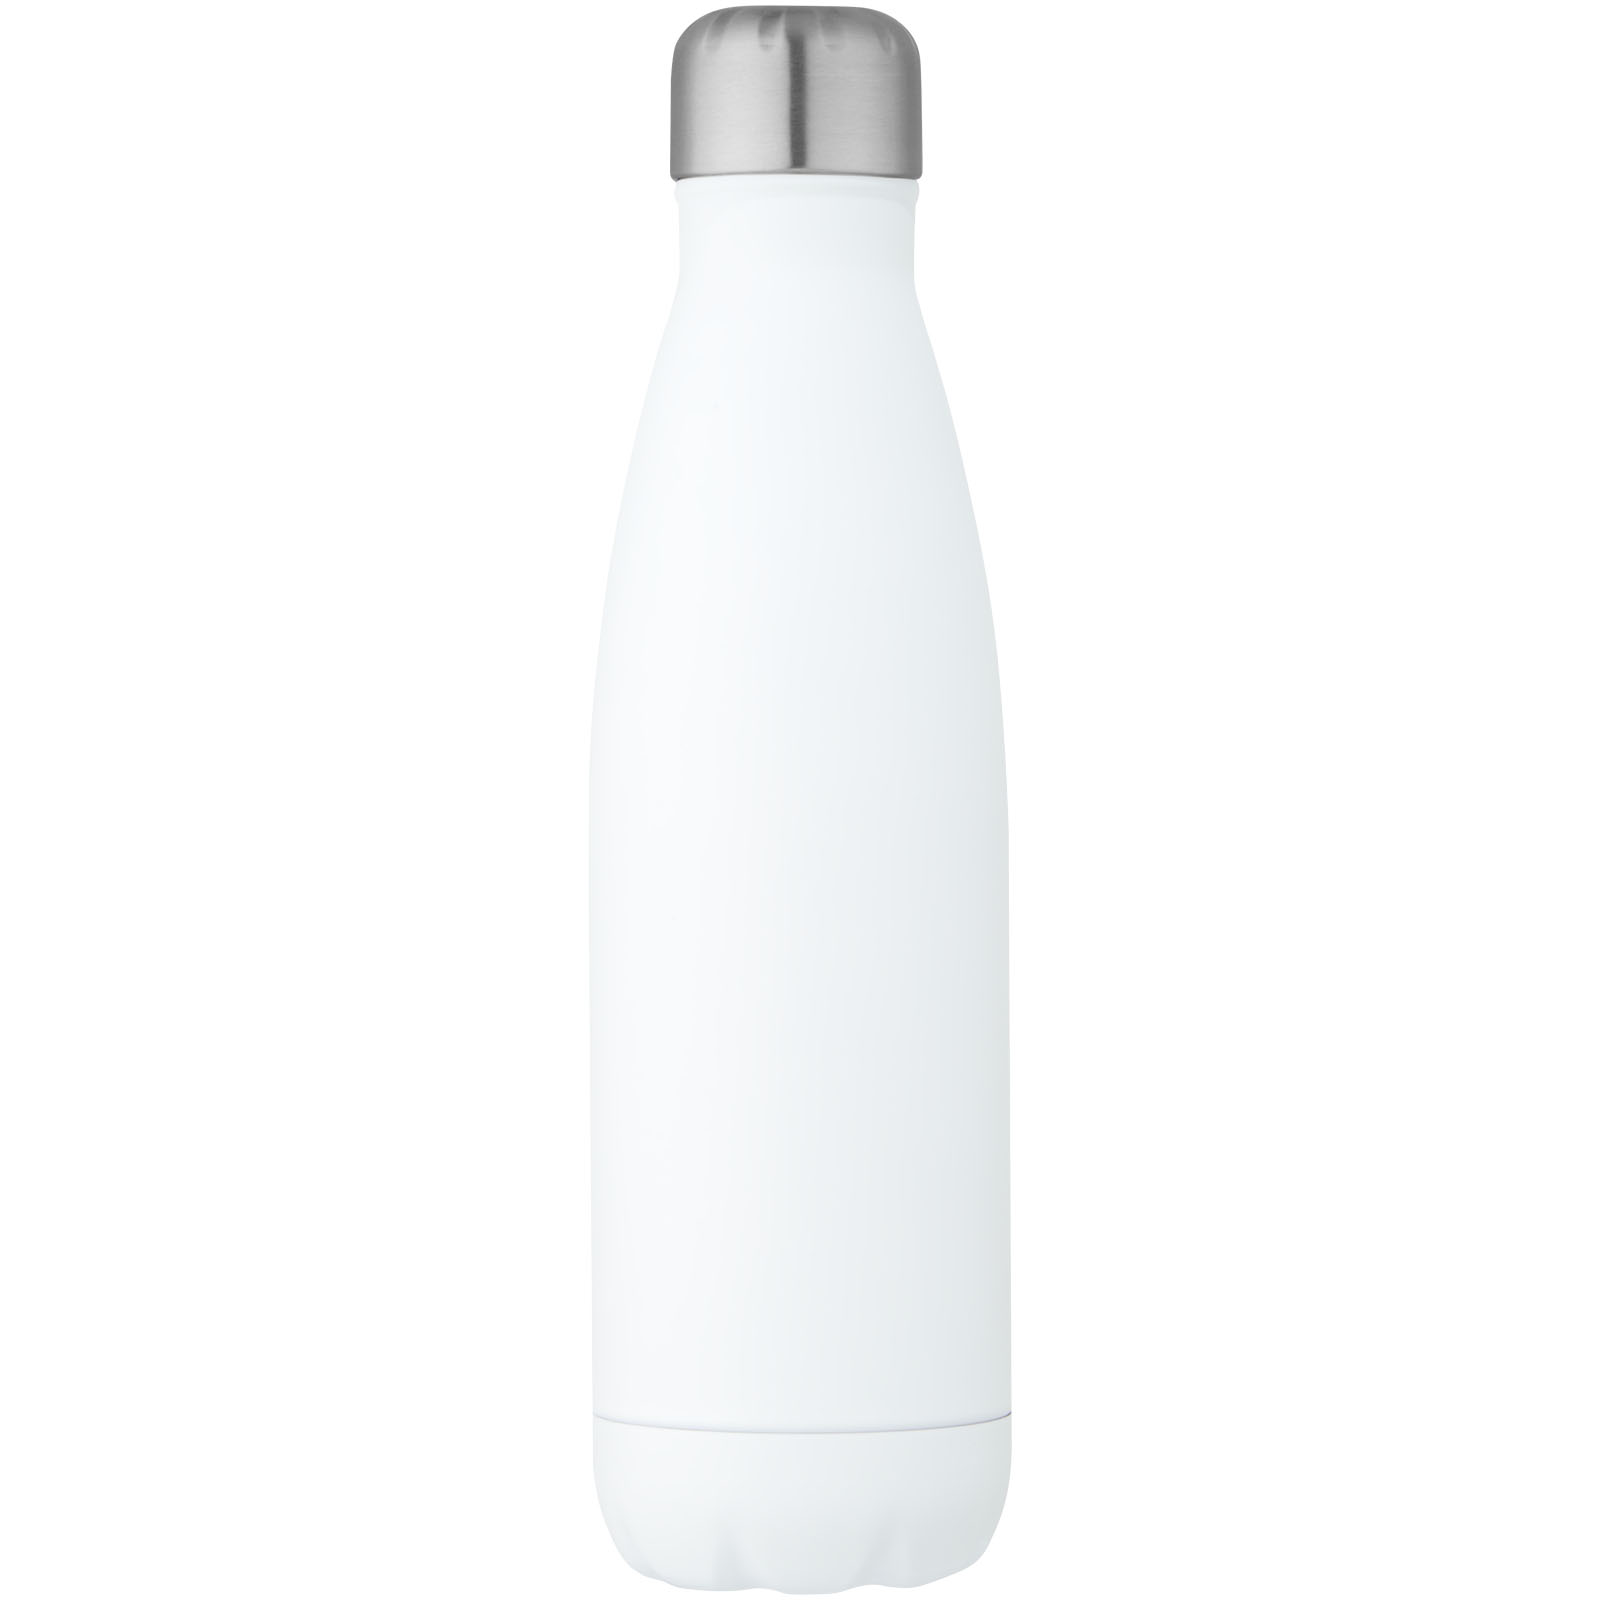 Advertising Insulated bottles - Cove 500 ml vacuum insulated stainless steel bottle - 2